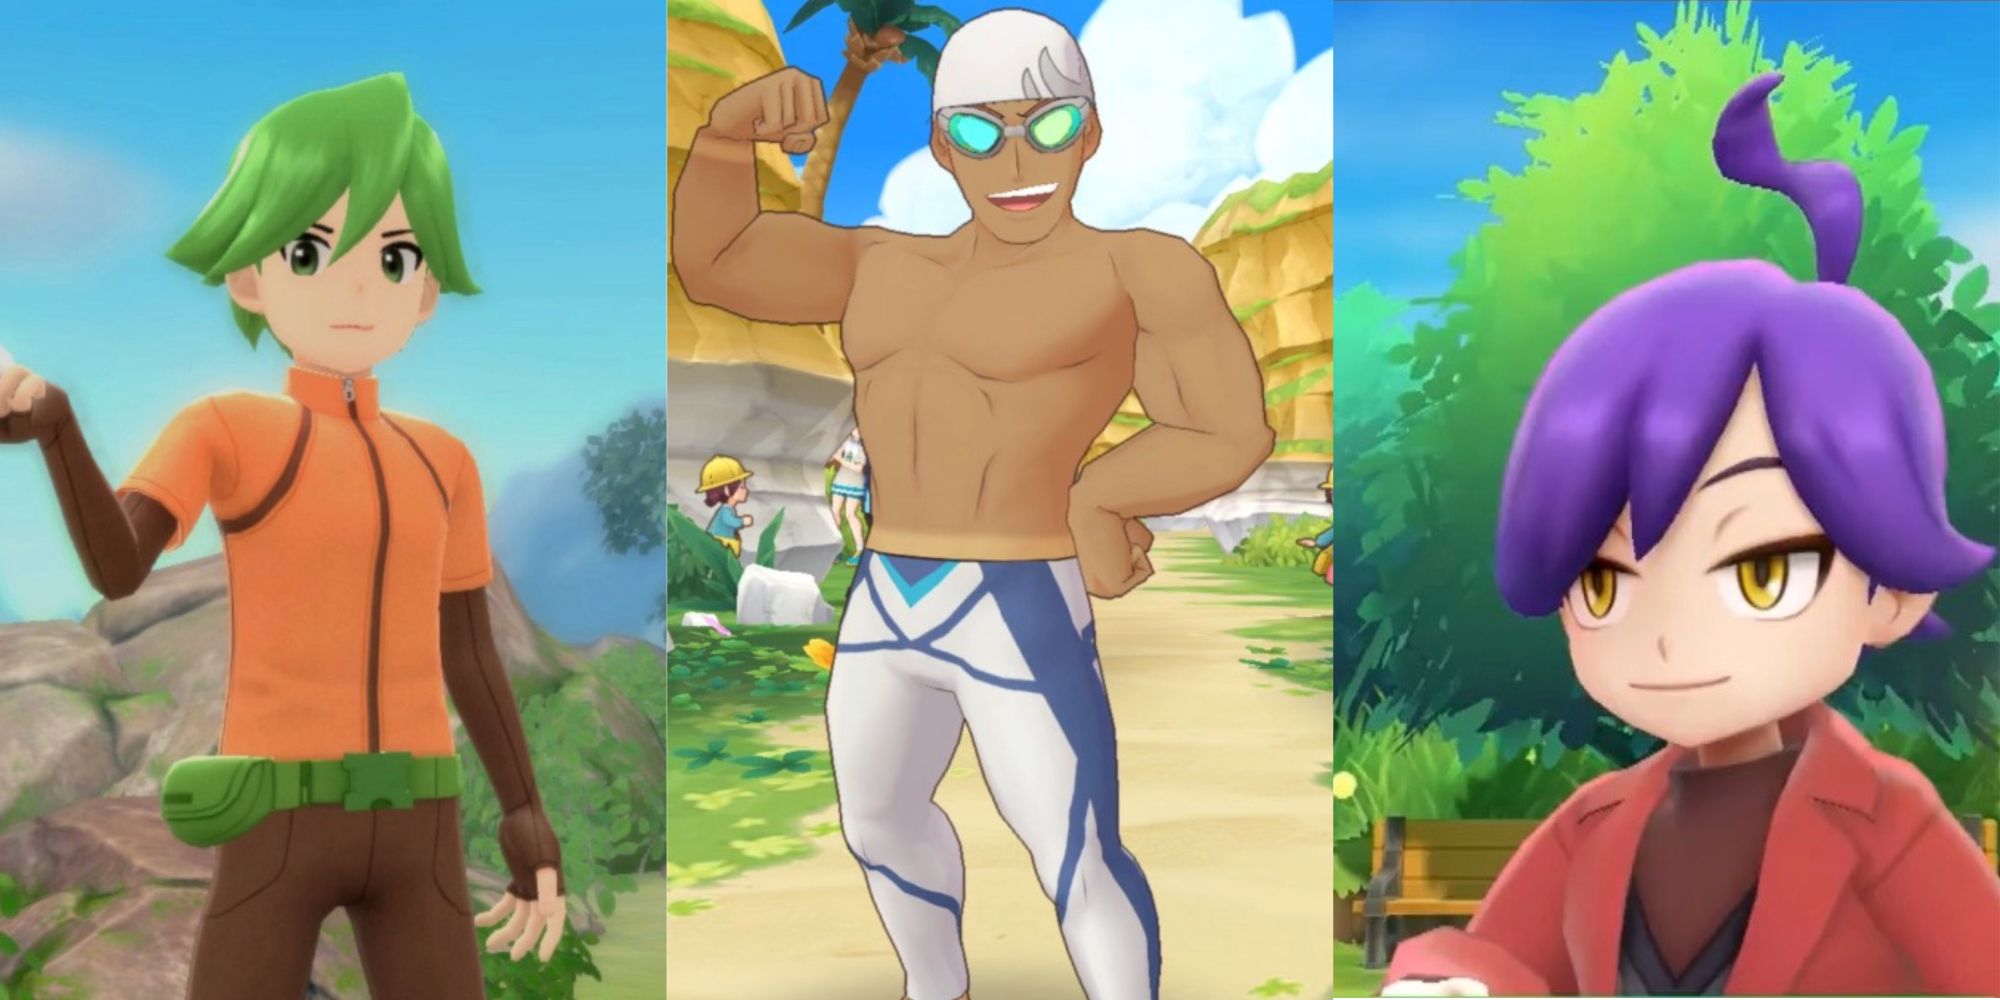 An Ace Trainer in orange, a swimmer flexing, and a psychic looking smug